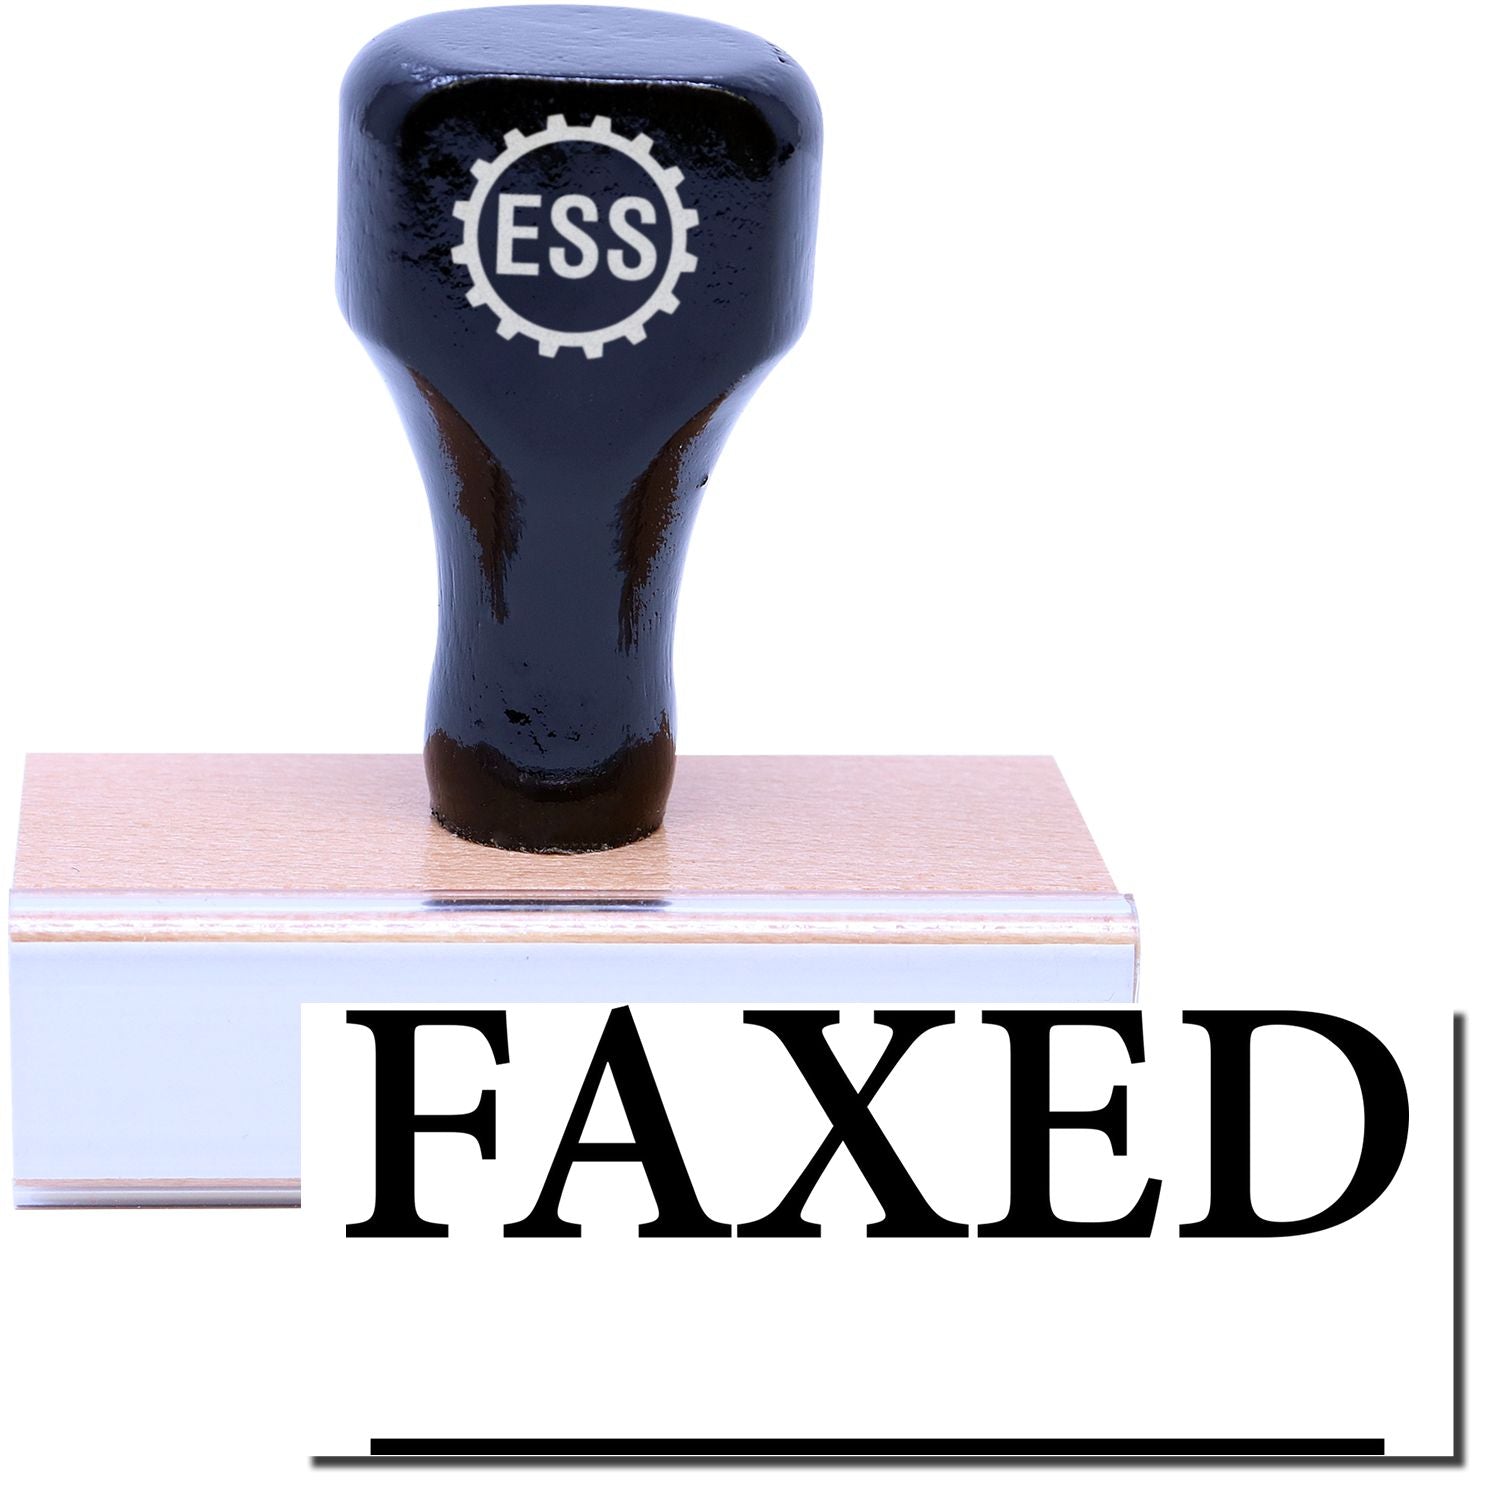 A stock office rubber stamp with a stamped image showing how the text "FAXED" in a large times font with a line underneath the text is displayed after stamping.